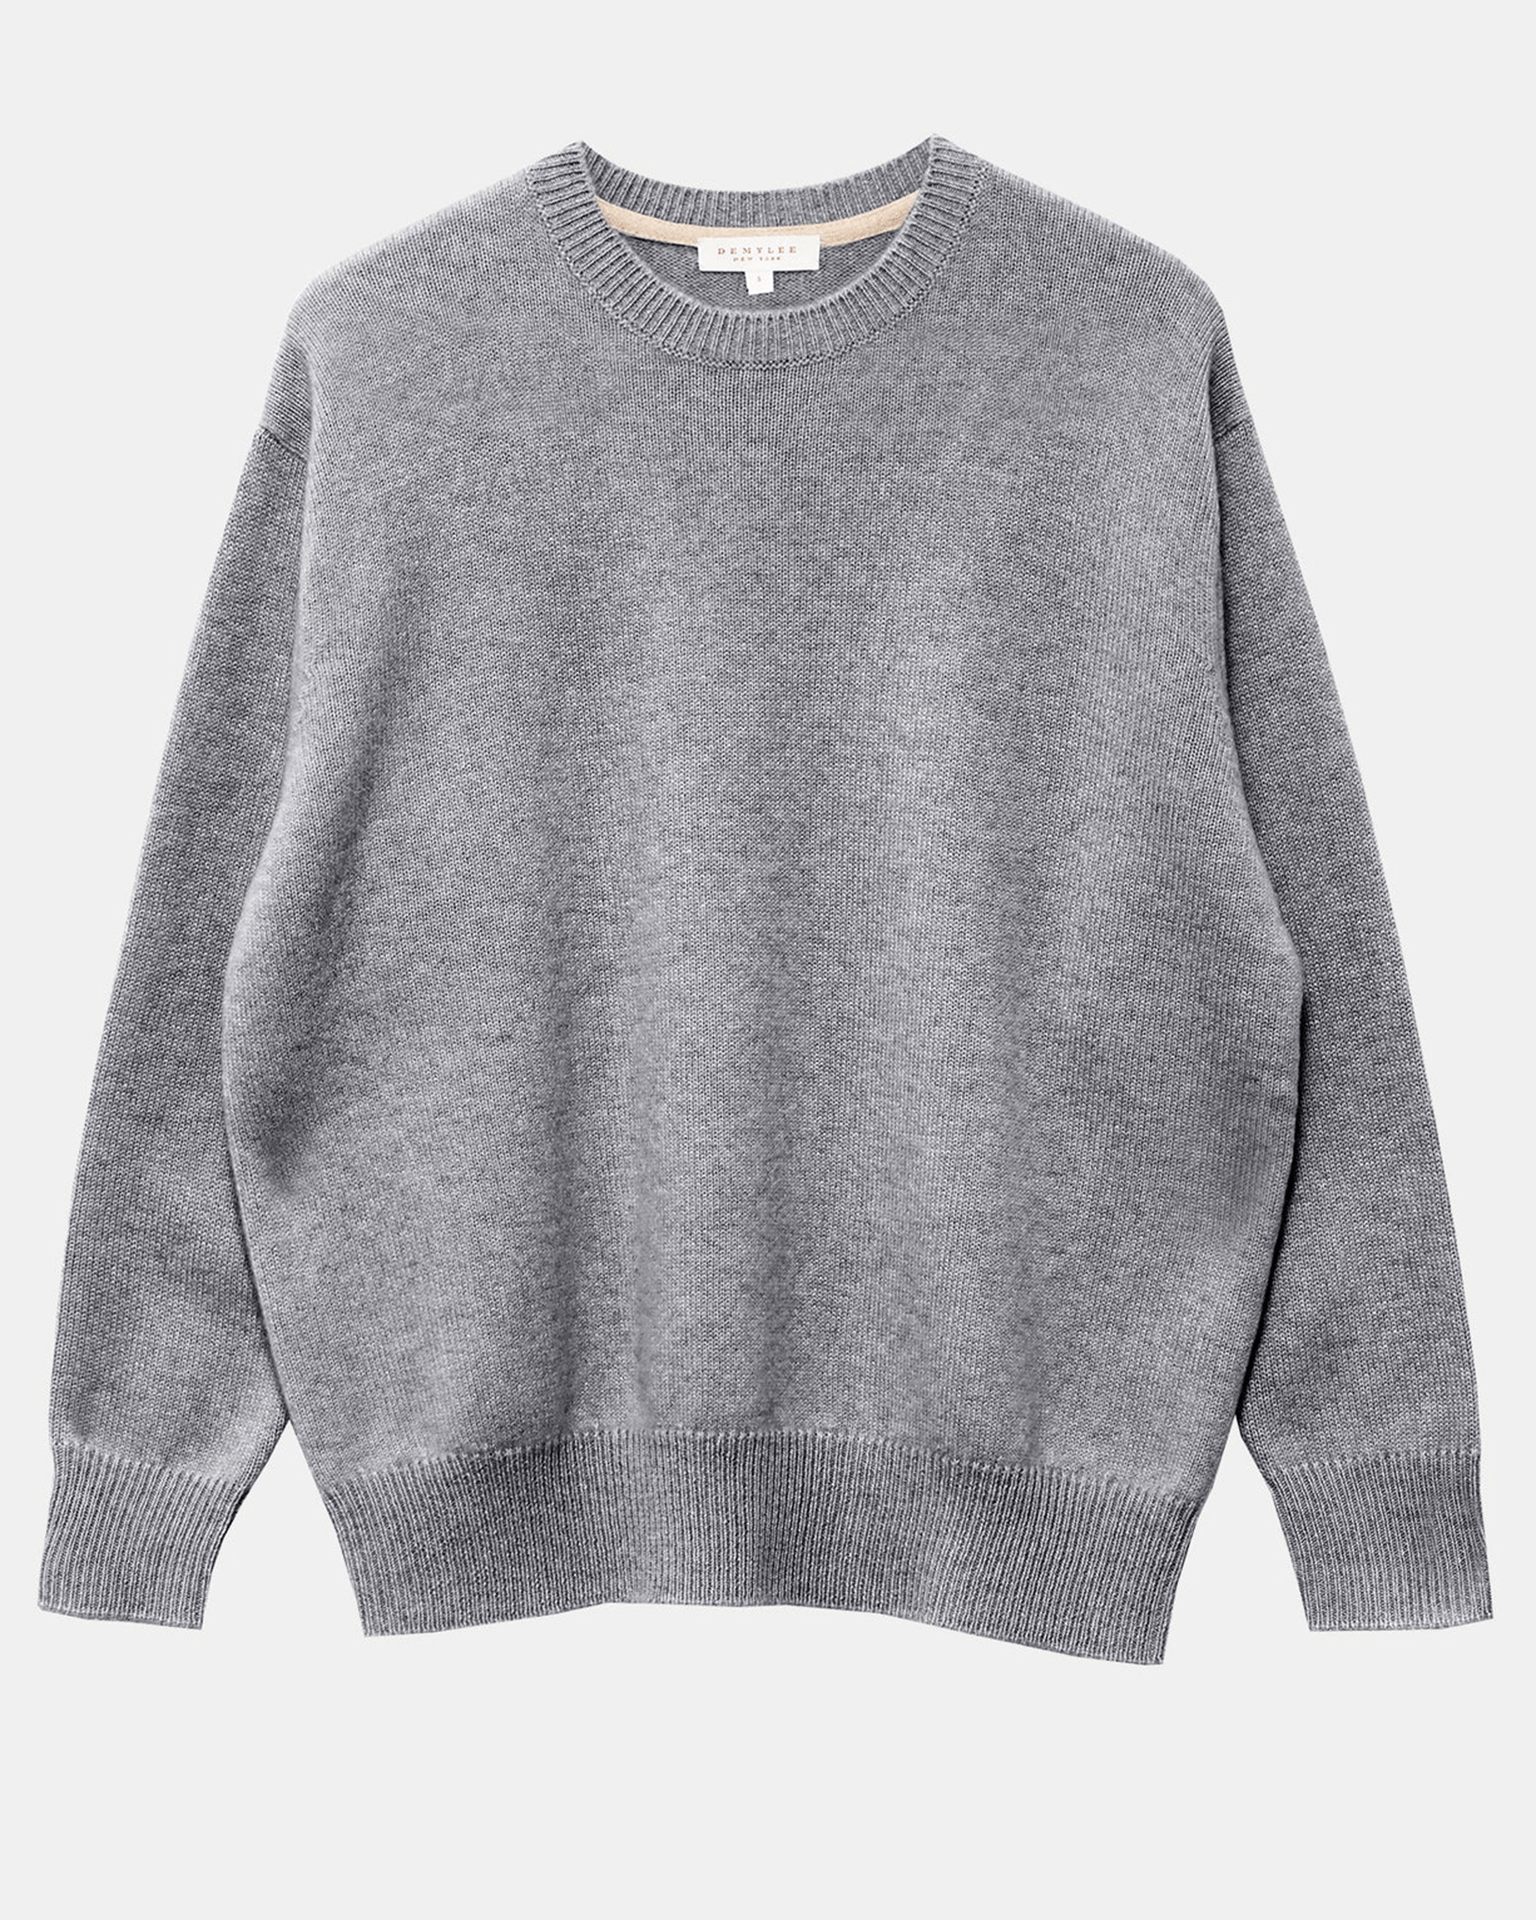 Gigi Easy Fit Crew Sweater in Med Heather Grey